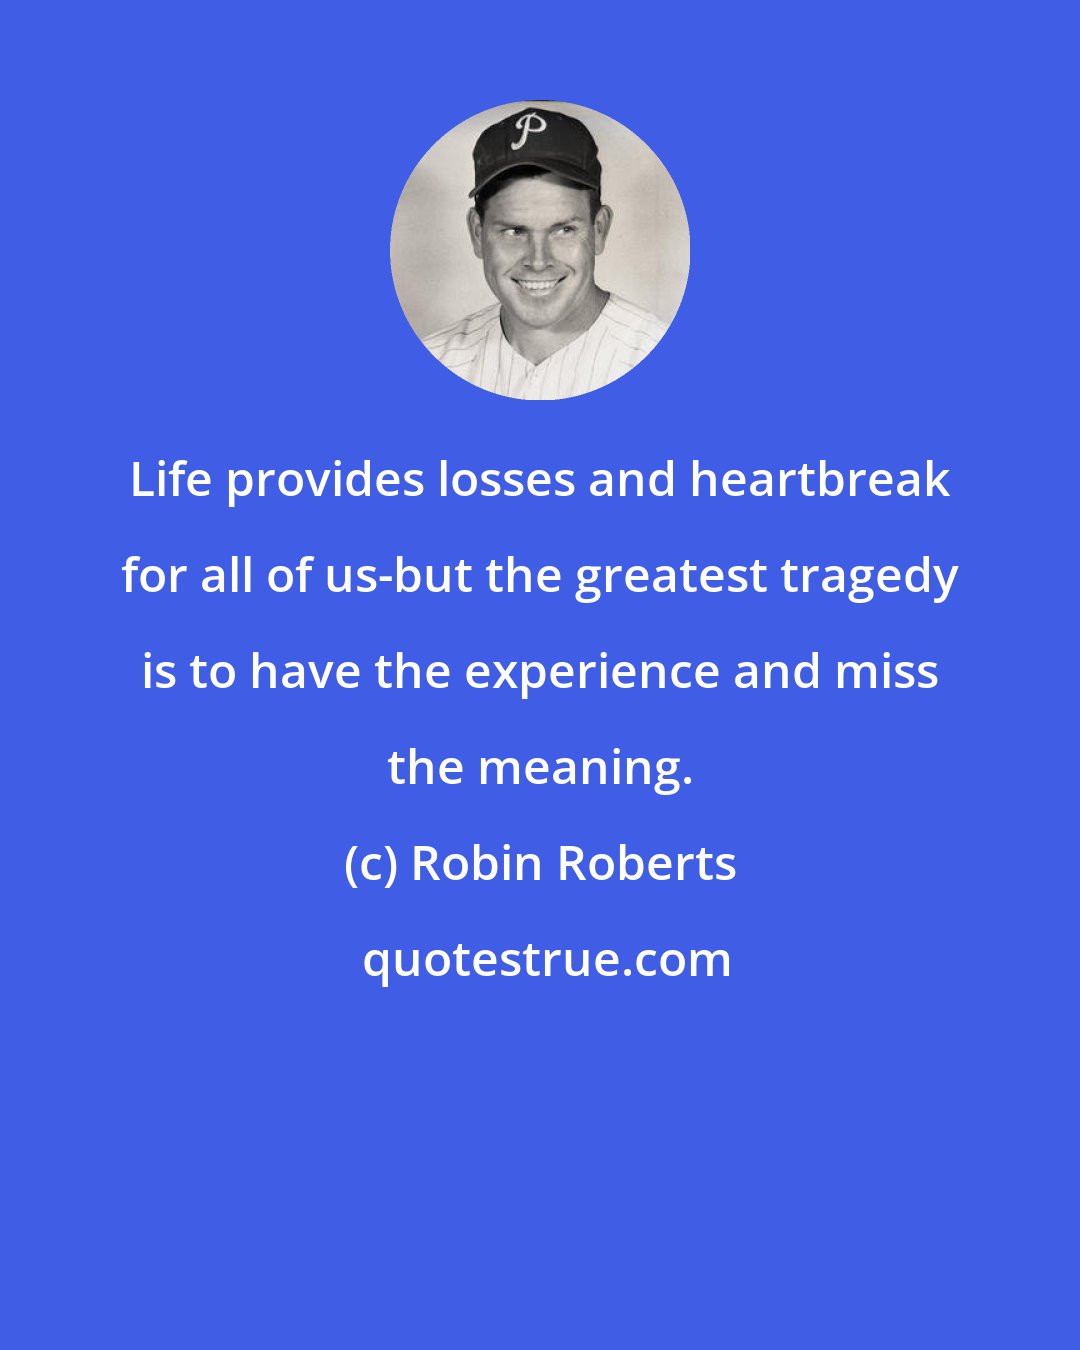 Robin Roberts: Life provides losses and heartbreak for all of us-but the greatest tragedy is to have the experience and miss the meaning.